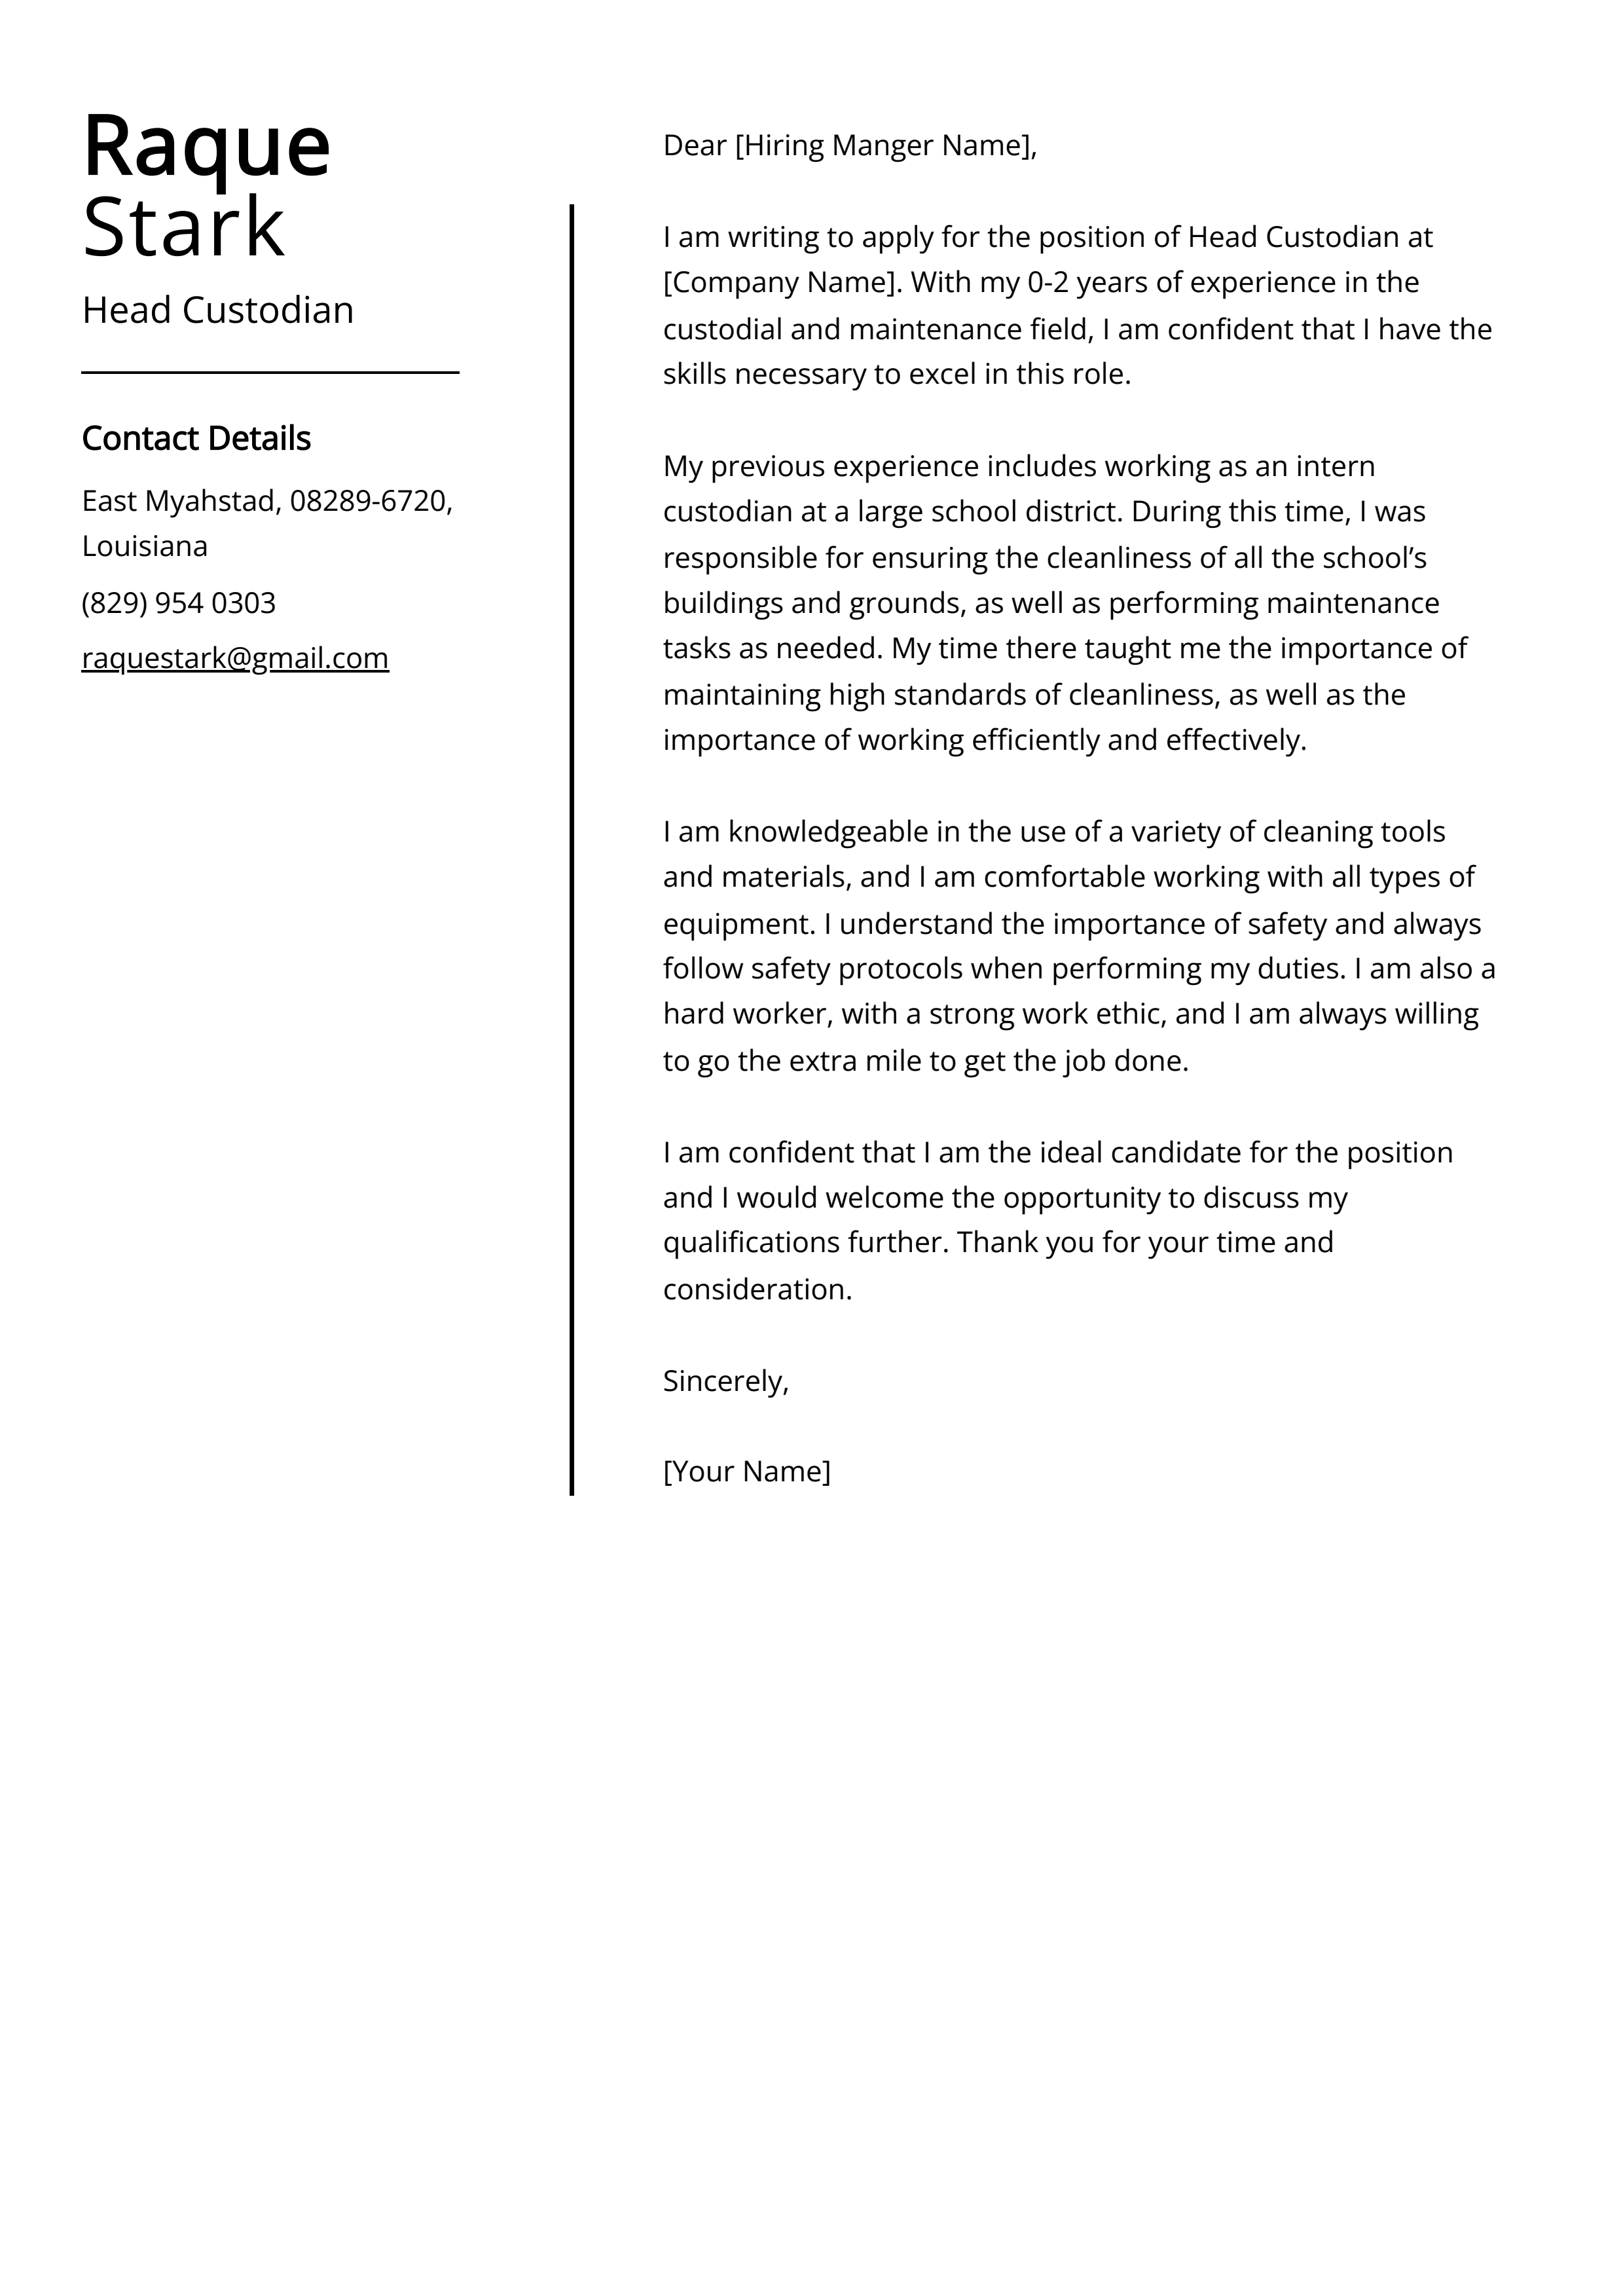 Head Custodian Cover Letter Example